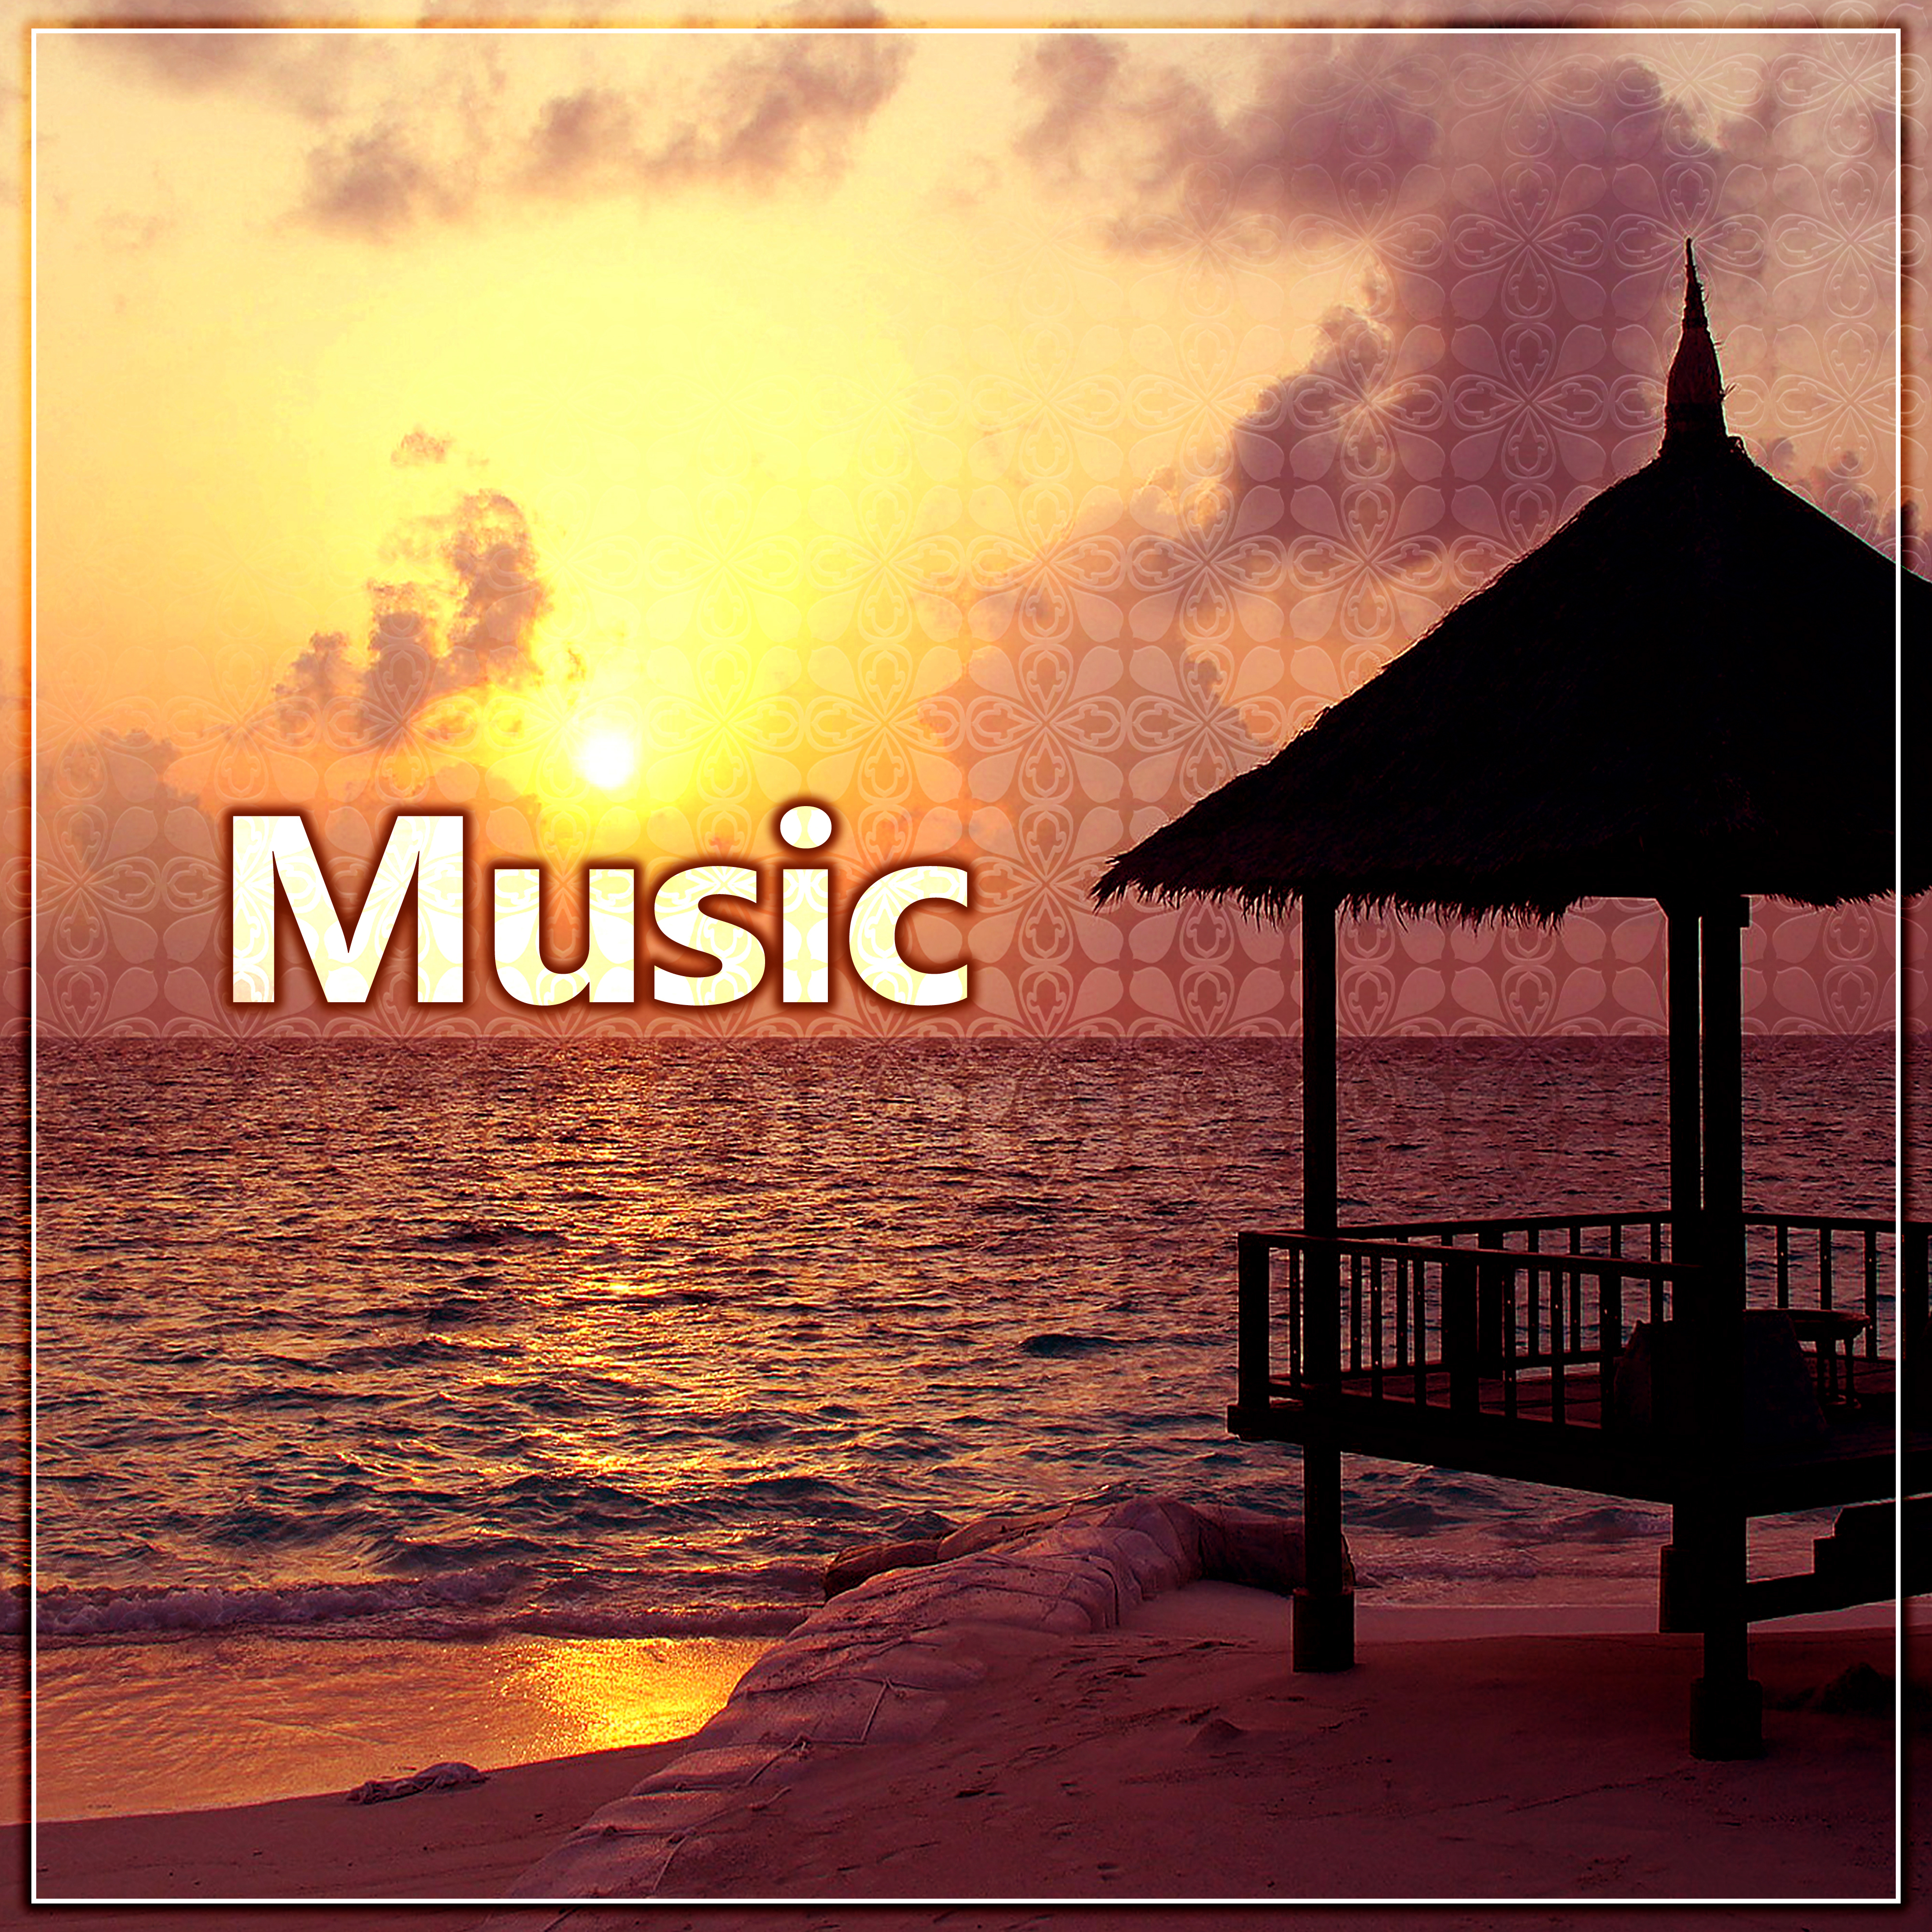 Music - Whole Summer, Sunny Moment, Holiday is Fun, Funny Situations, Good Time